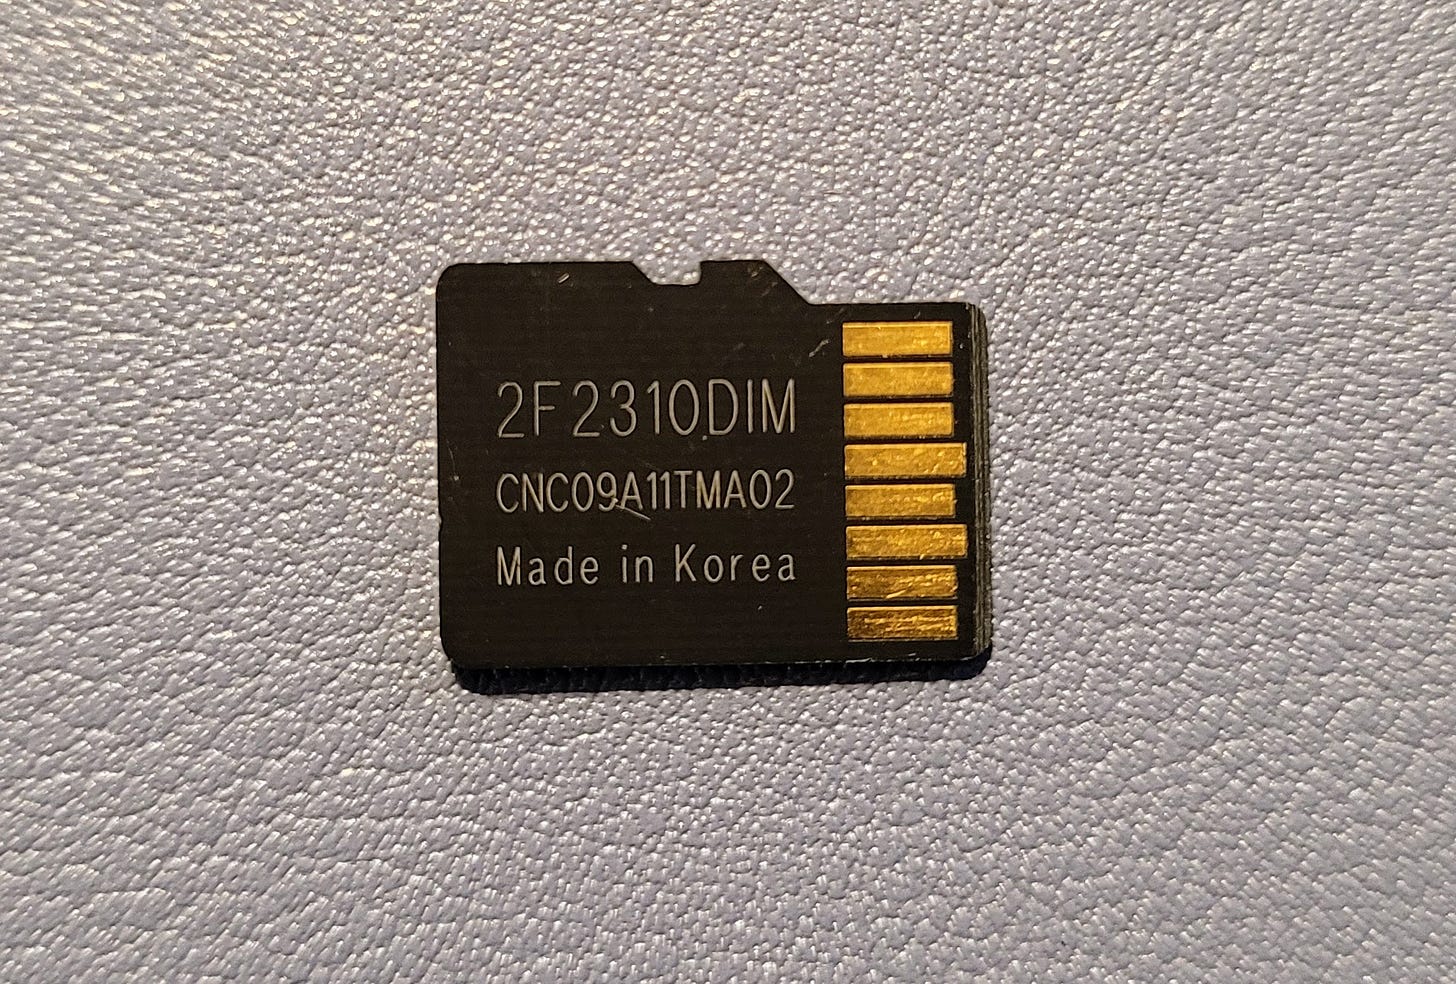 The microSD card, greatly enlarged